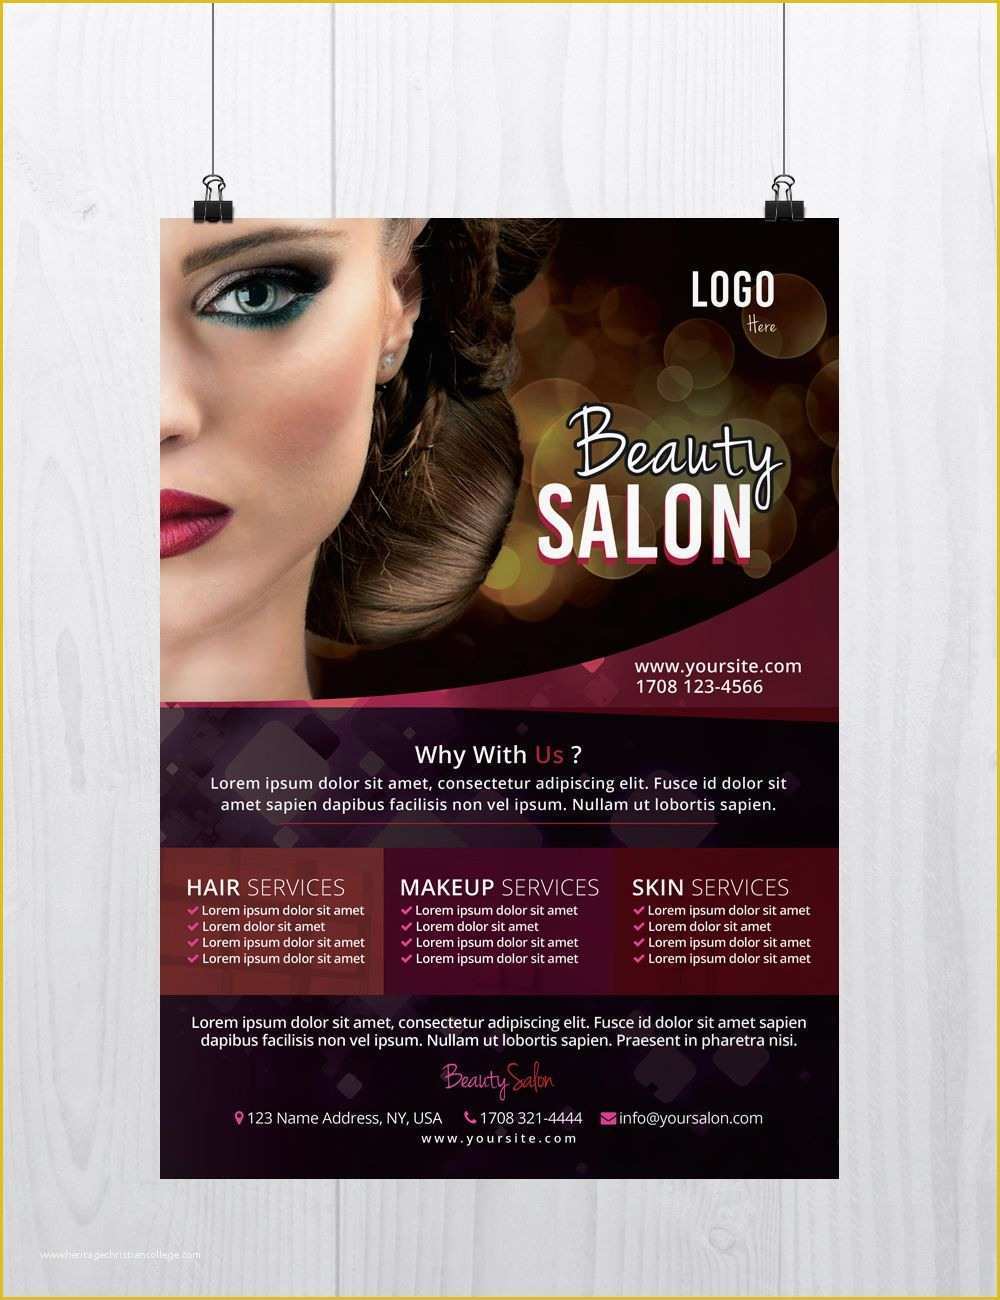 Free Psd Business Flyer Templates Of Beauty Salon is A Free Psd Flyer Template to Download